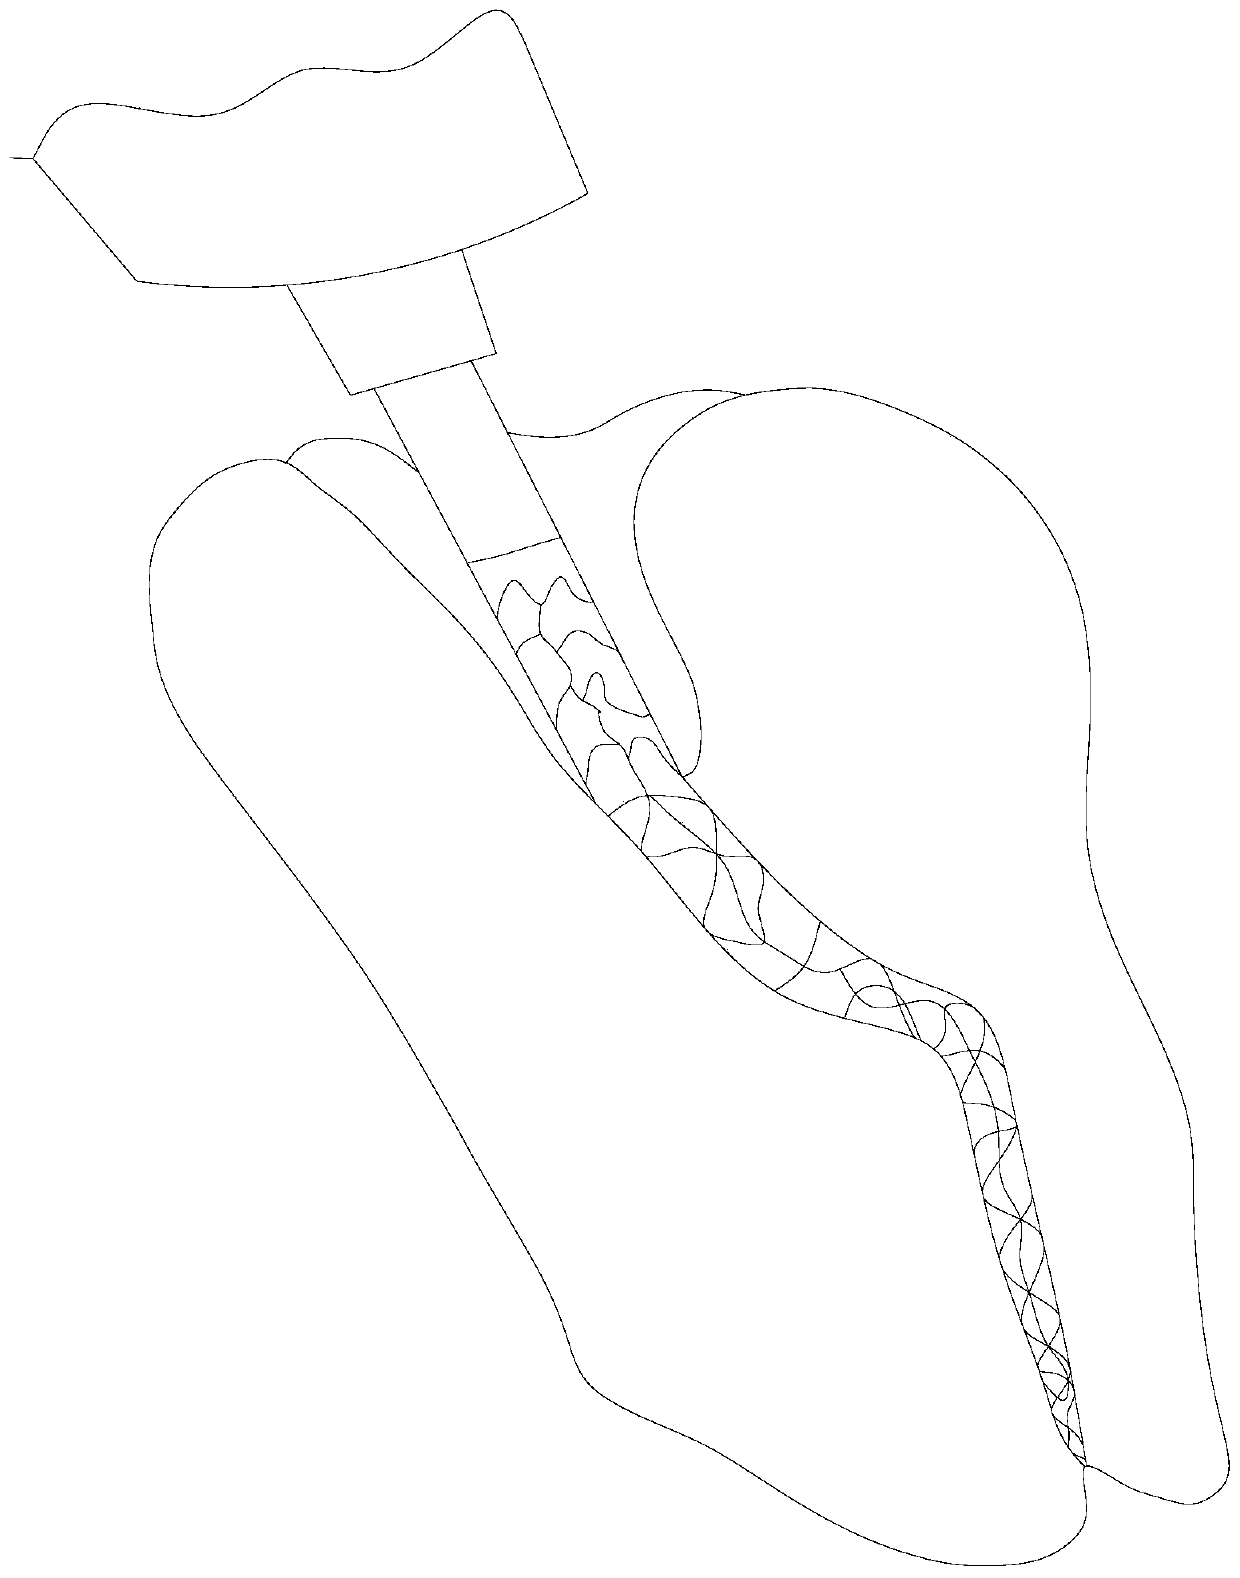 Tooth root file with corner protection device